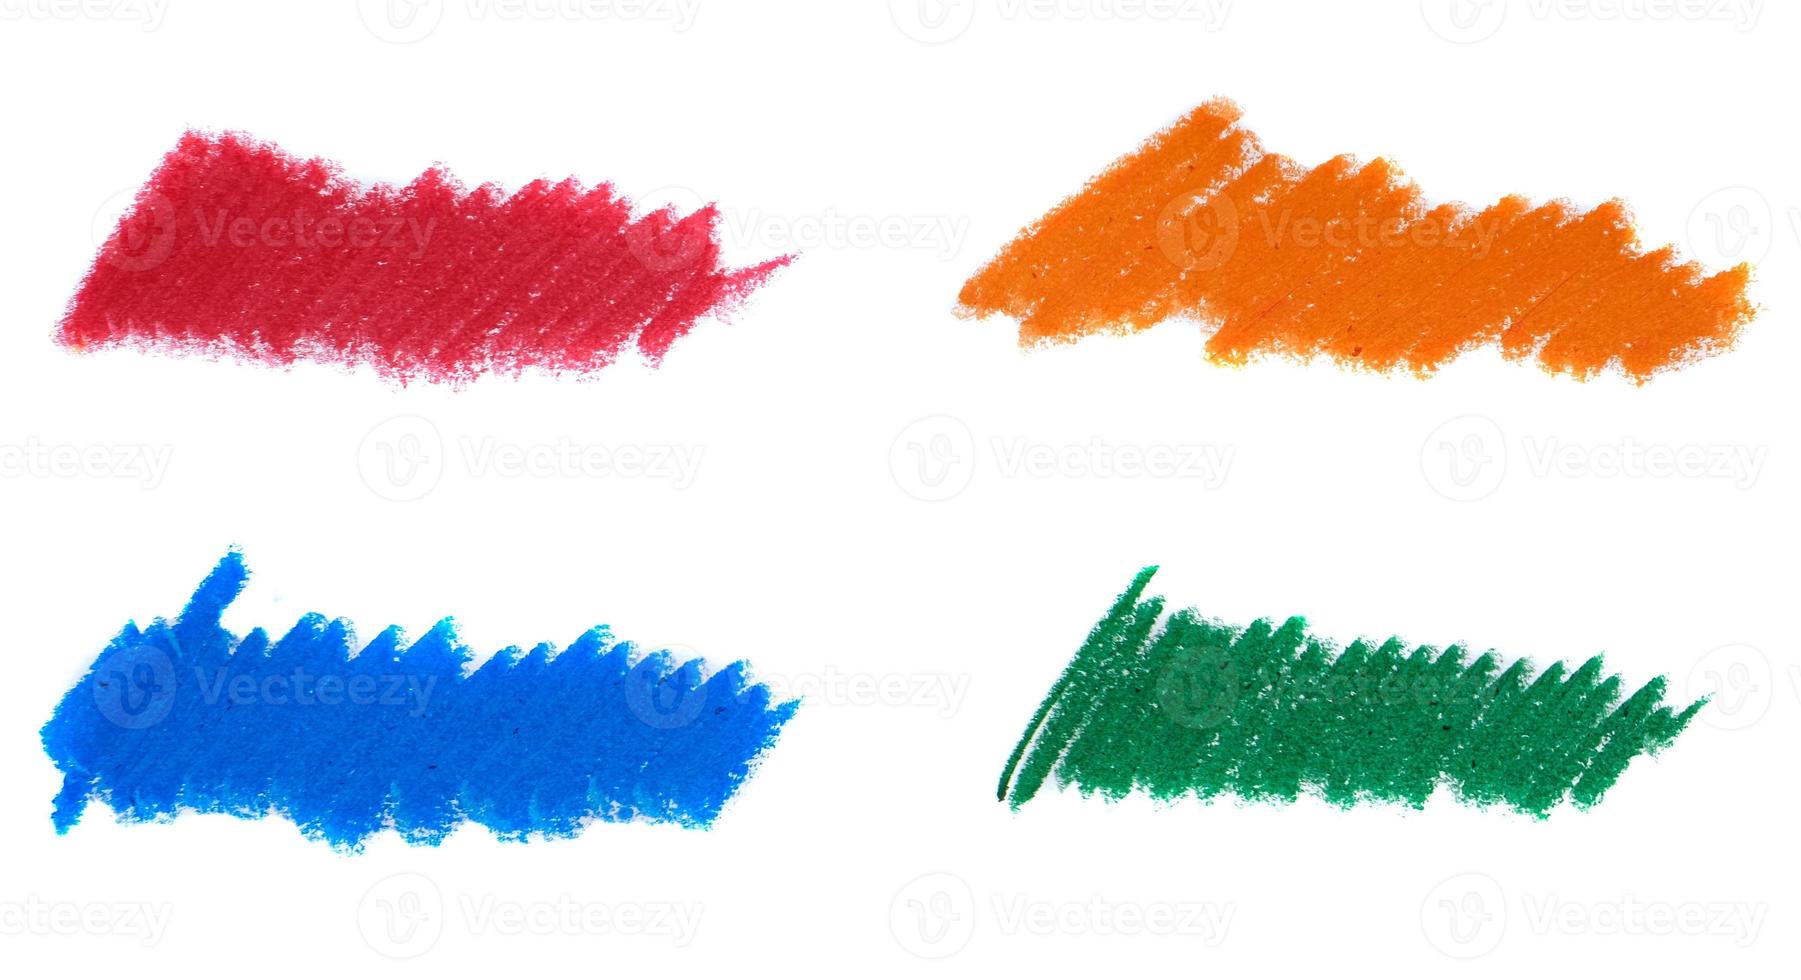 Abstract crayon on white background. Blue, orange, green and red crayon scribble texture. photo